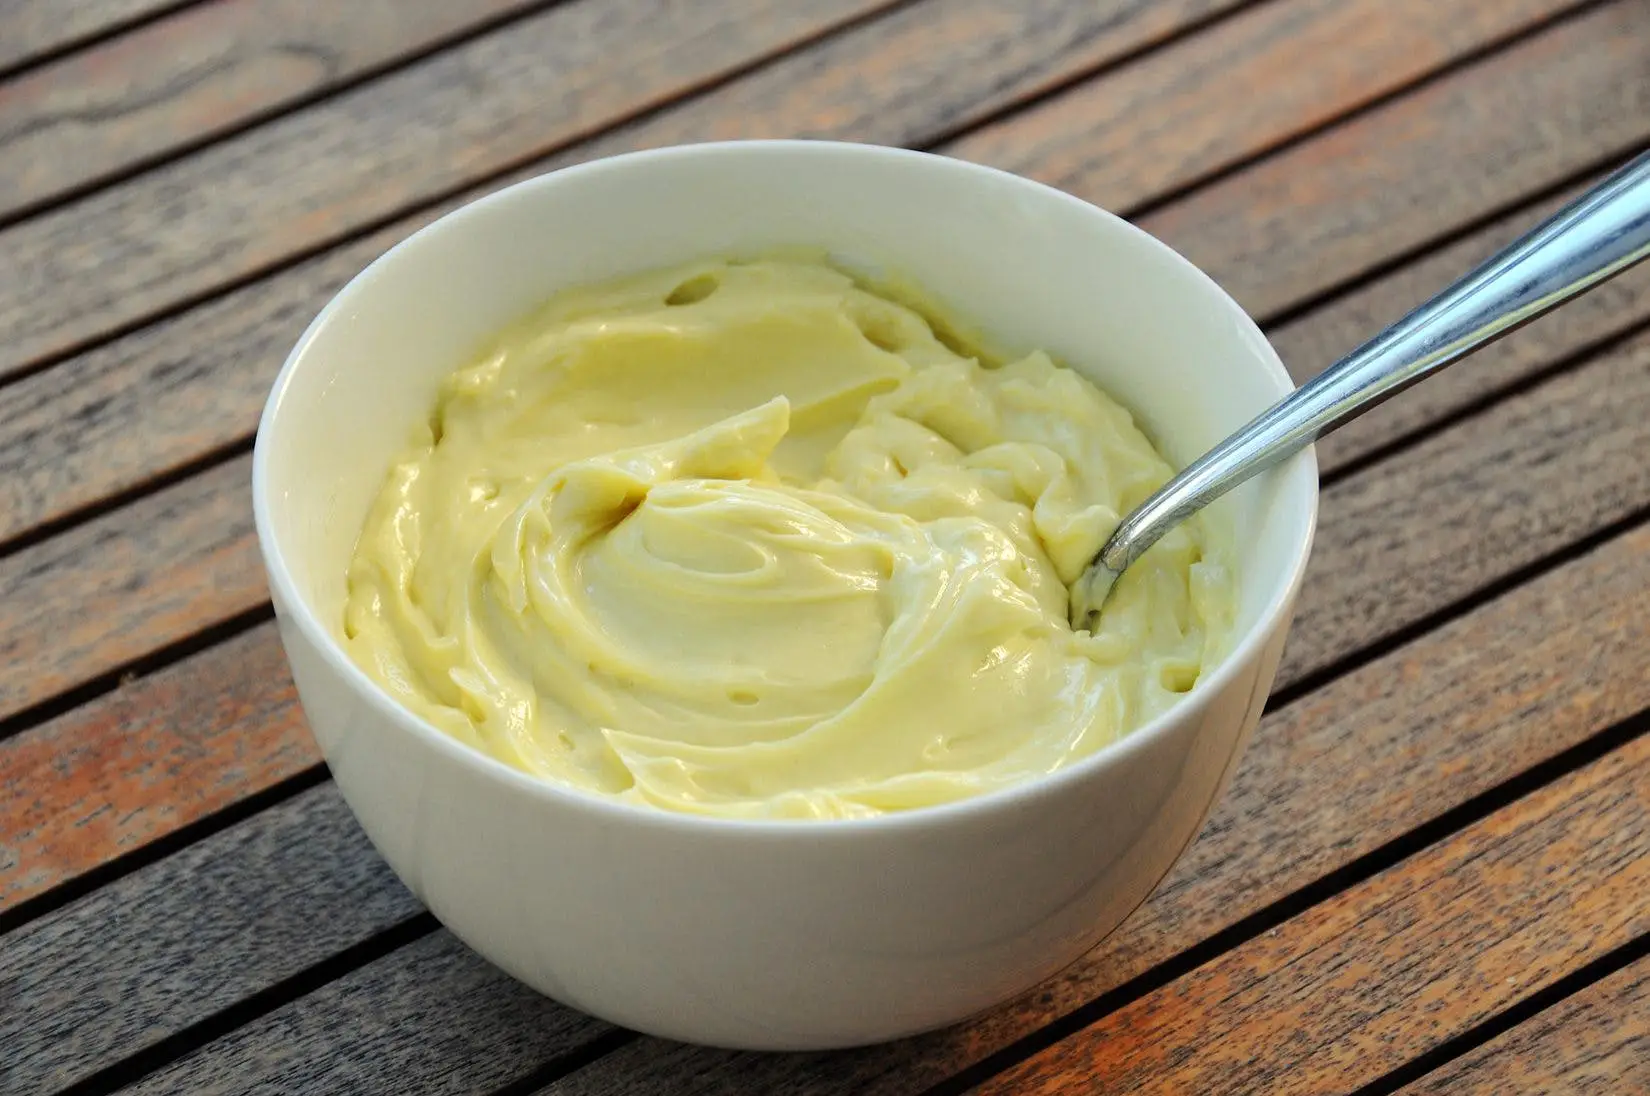 Comment rattraper une mayonnaise ?